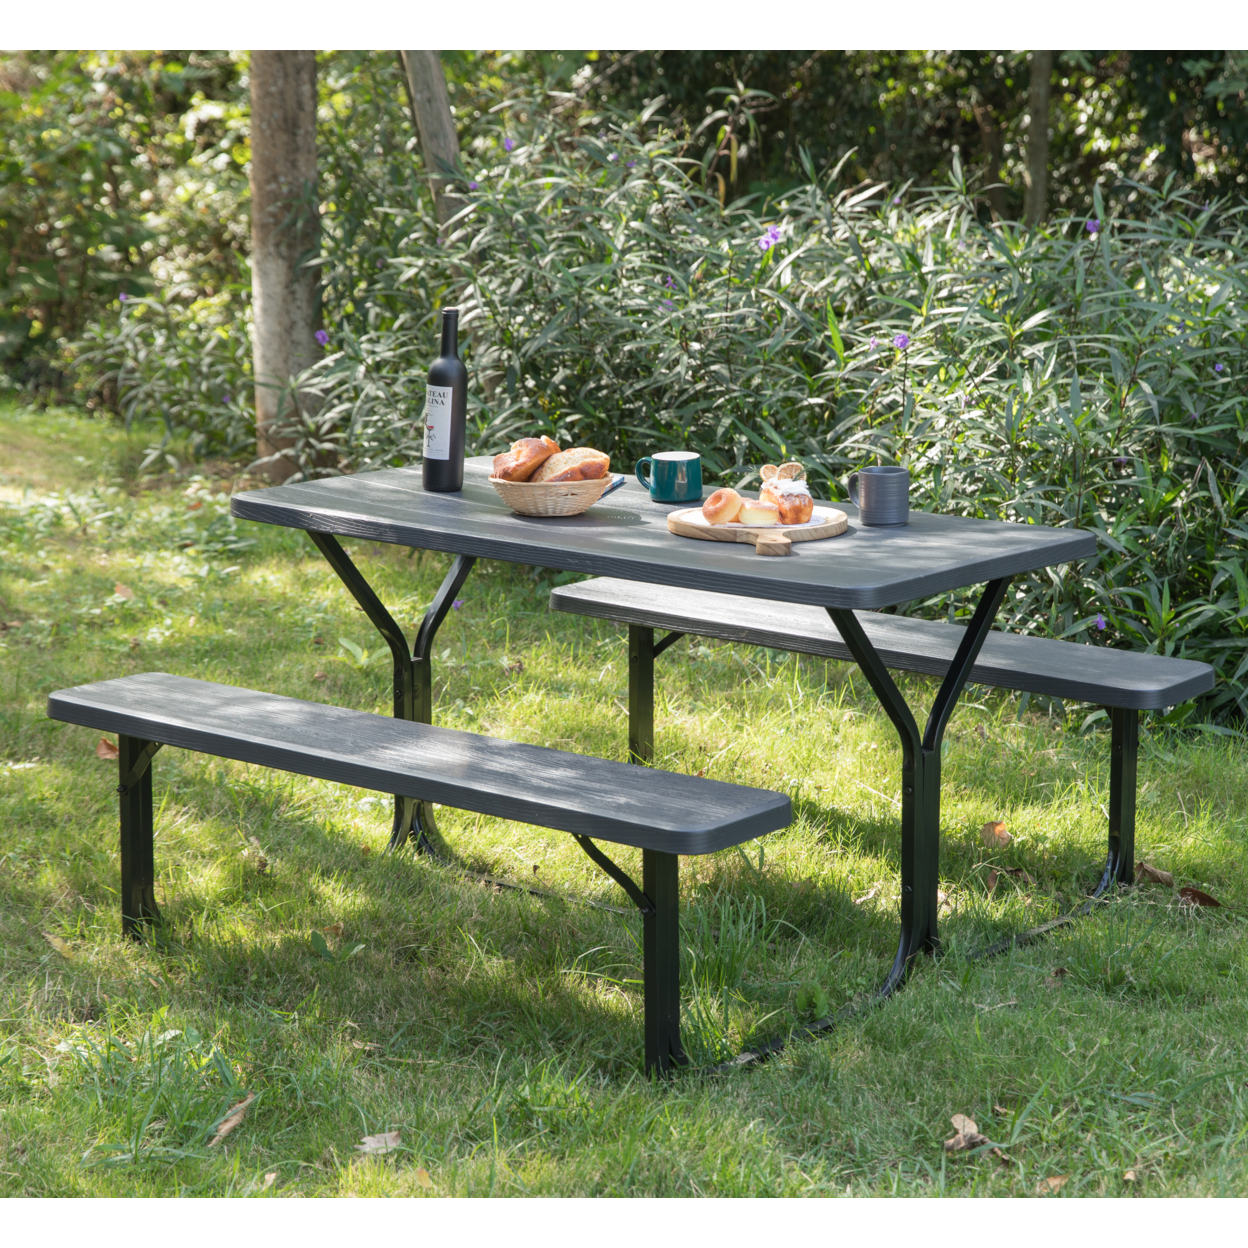 Outdoor Woodgrain Picnic Table Set With Metal Frame, Gray